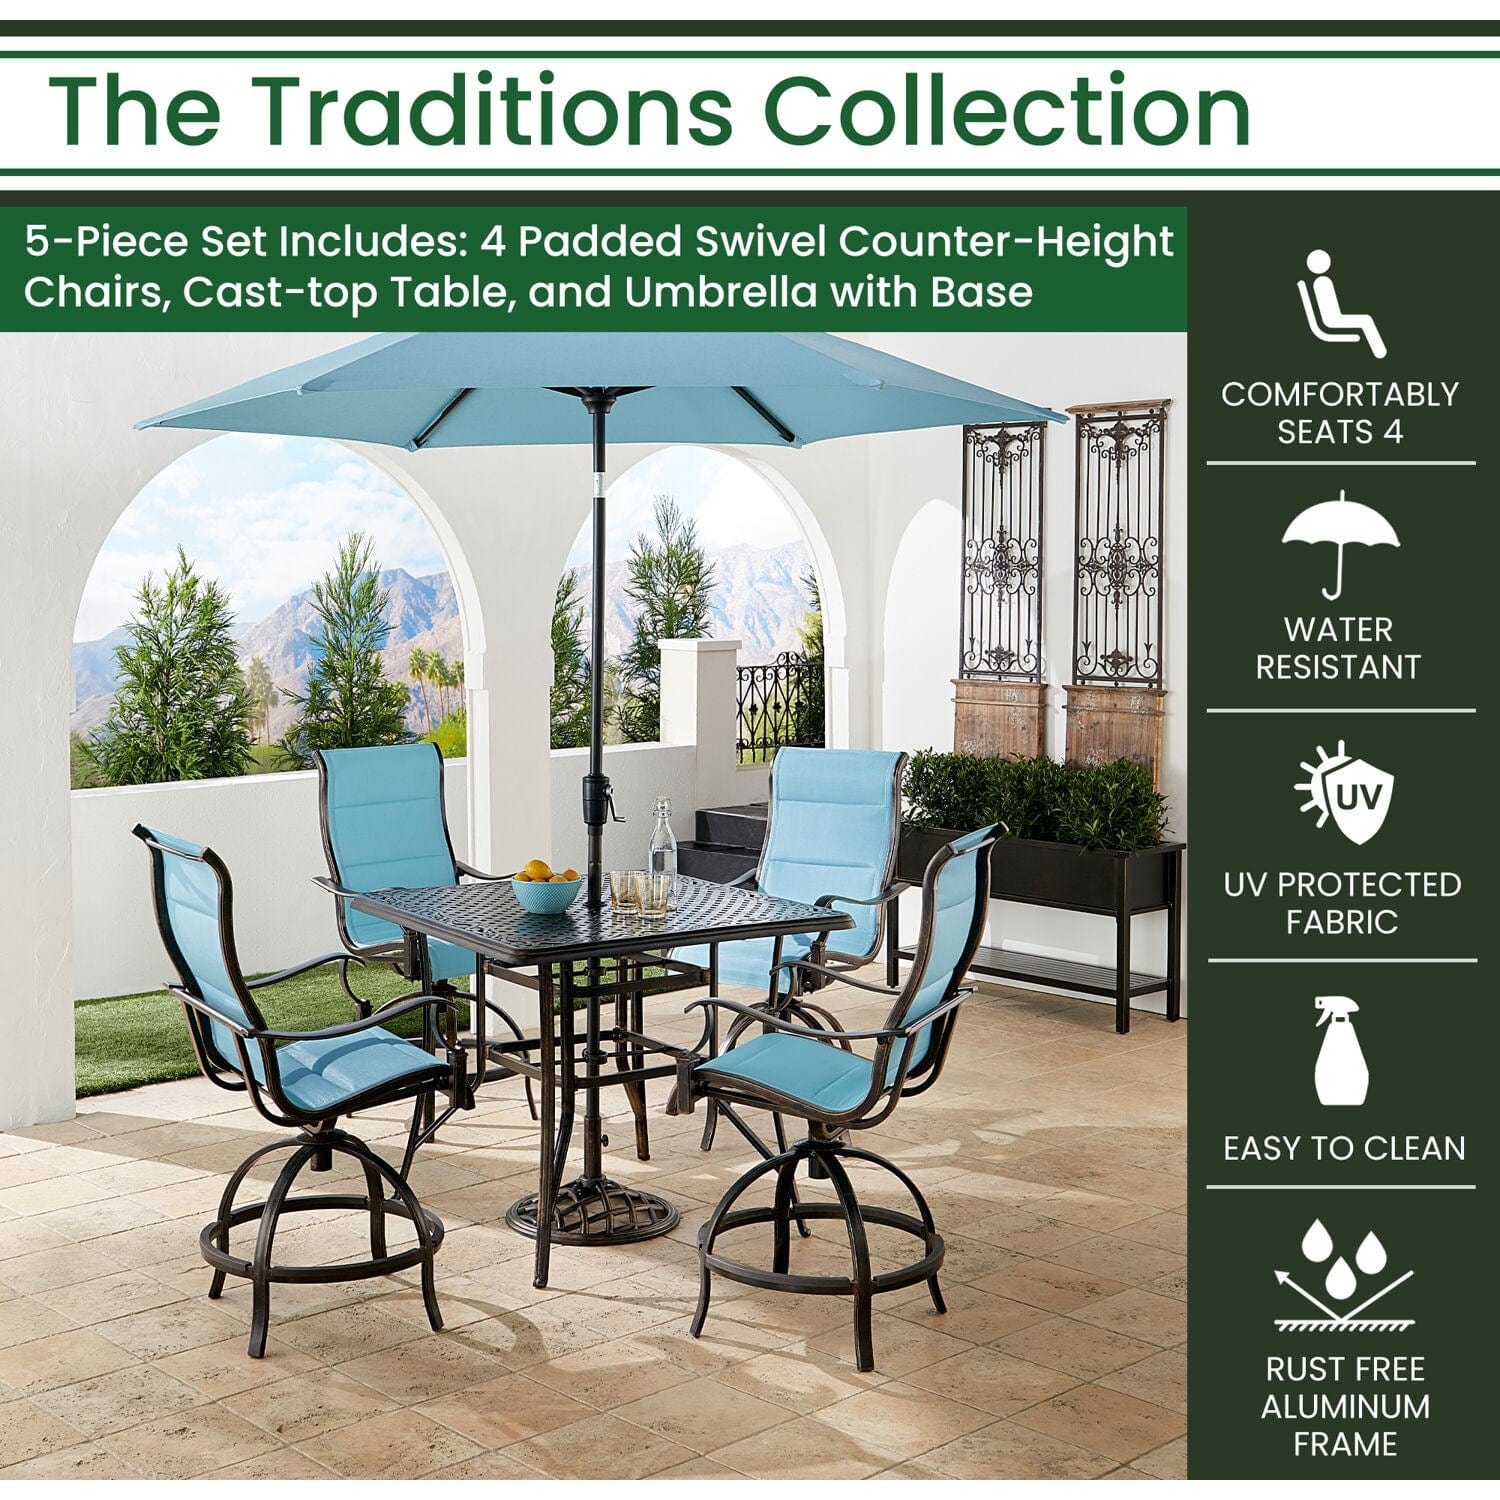 Hanover Outdoor Dining Set Hanover Traditions 5-Piece High-Dining Set in Blue with 4 Swivel Counter-Height Chairs, 42-in. Table, and 9-ft Umbrella